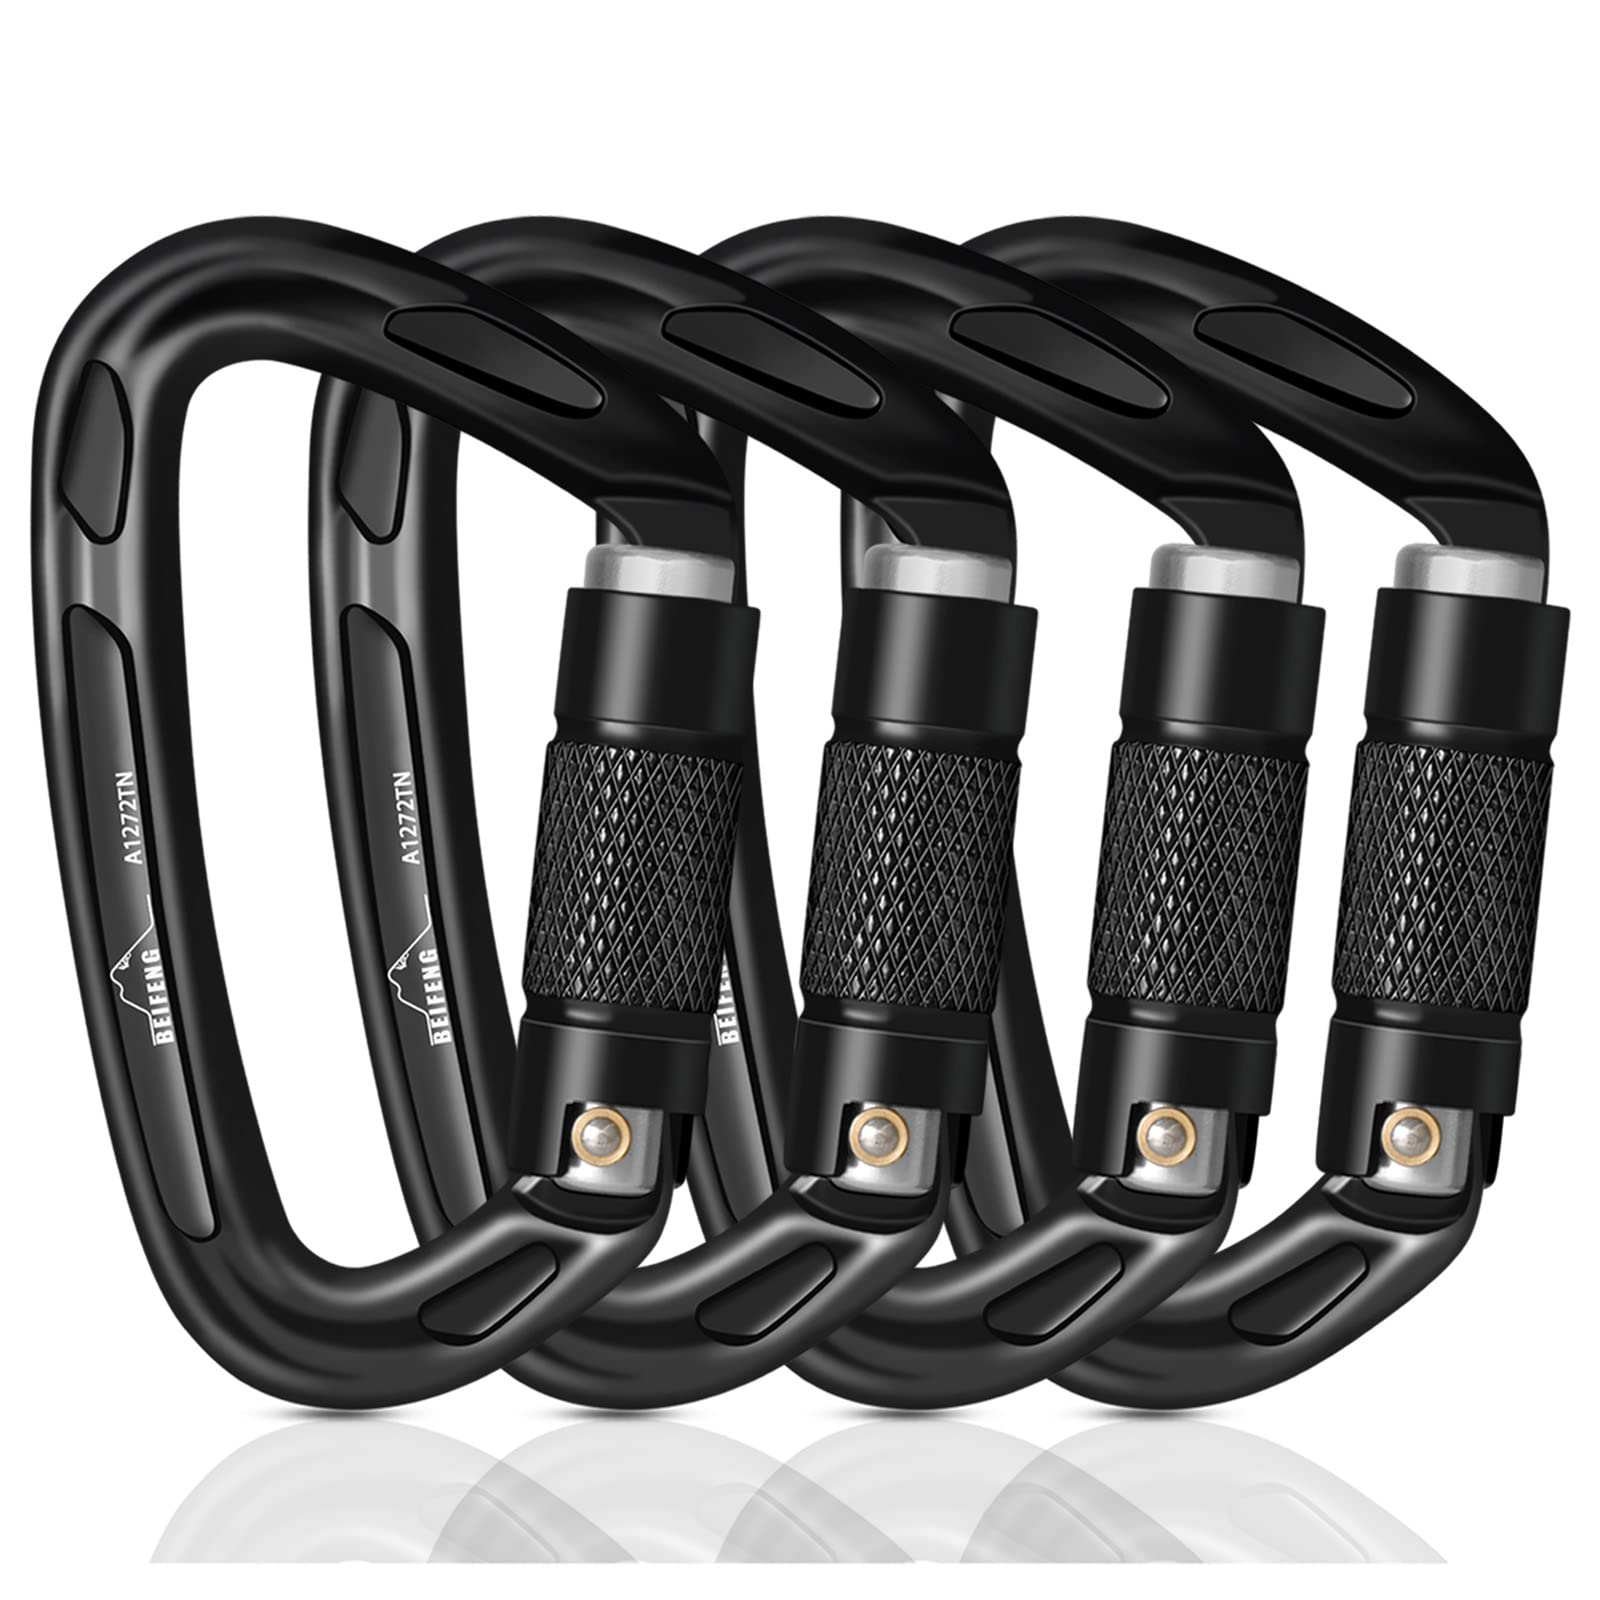 BEIFENG Auto Locking Carabiner 25KN Climbing Carabiner Large Carabiner Clip  Obtained UIAA Certification Heavy Duty Carabiners Suitable for Rock  Climbing, Camping, Gym,Rescue Black Black & silver4Pcs